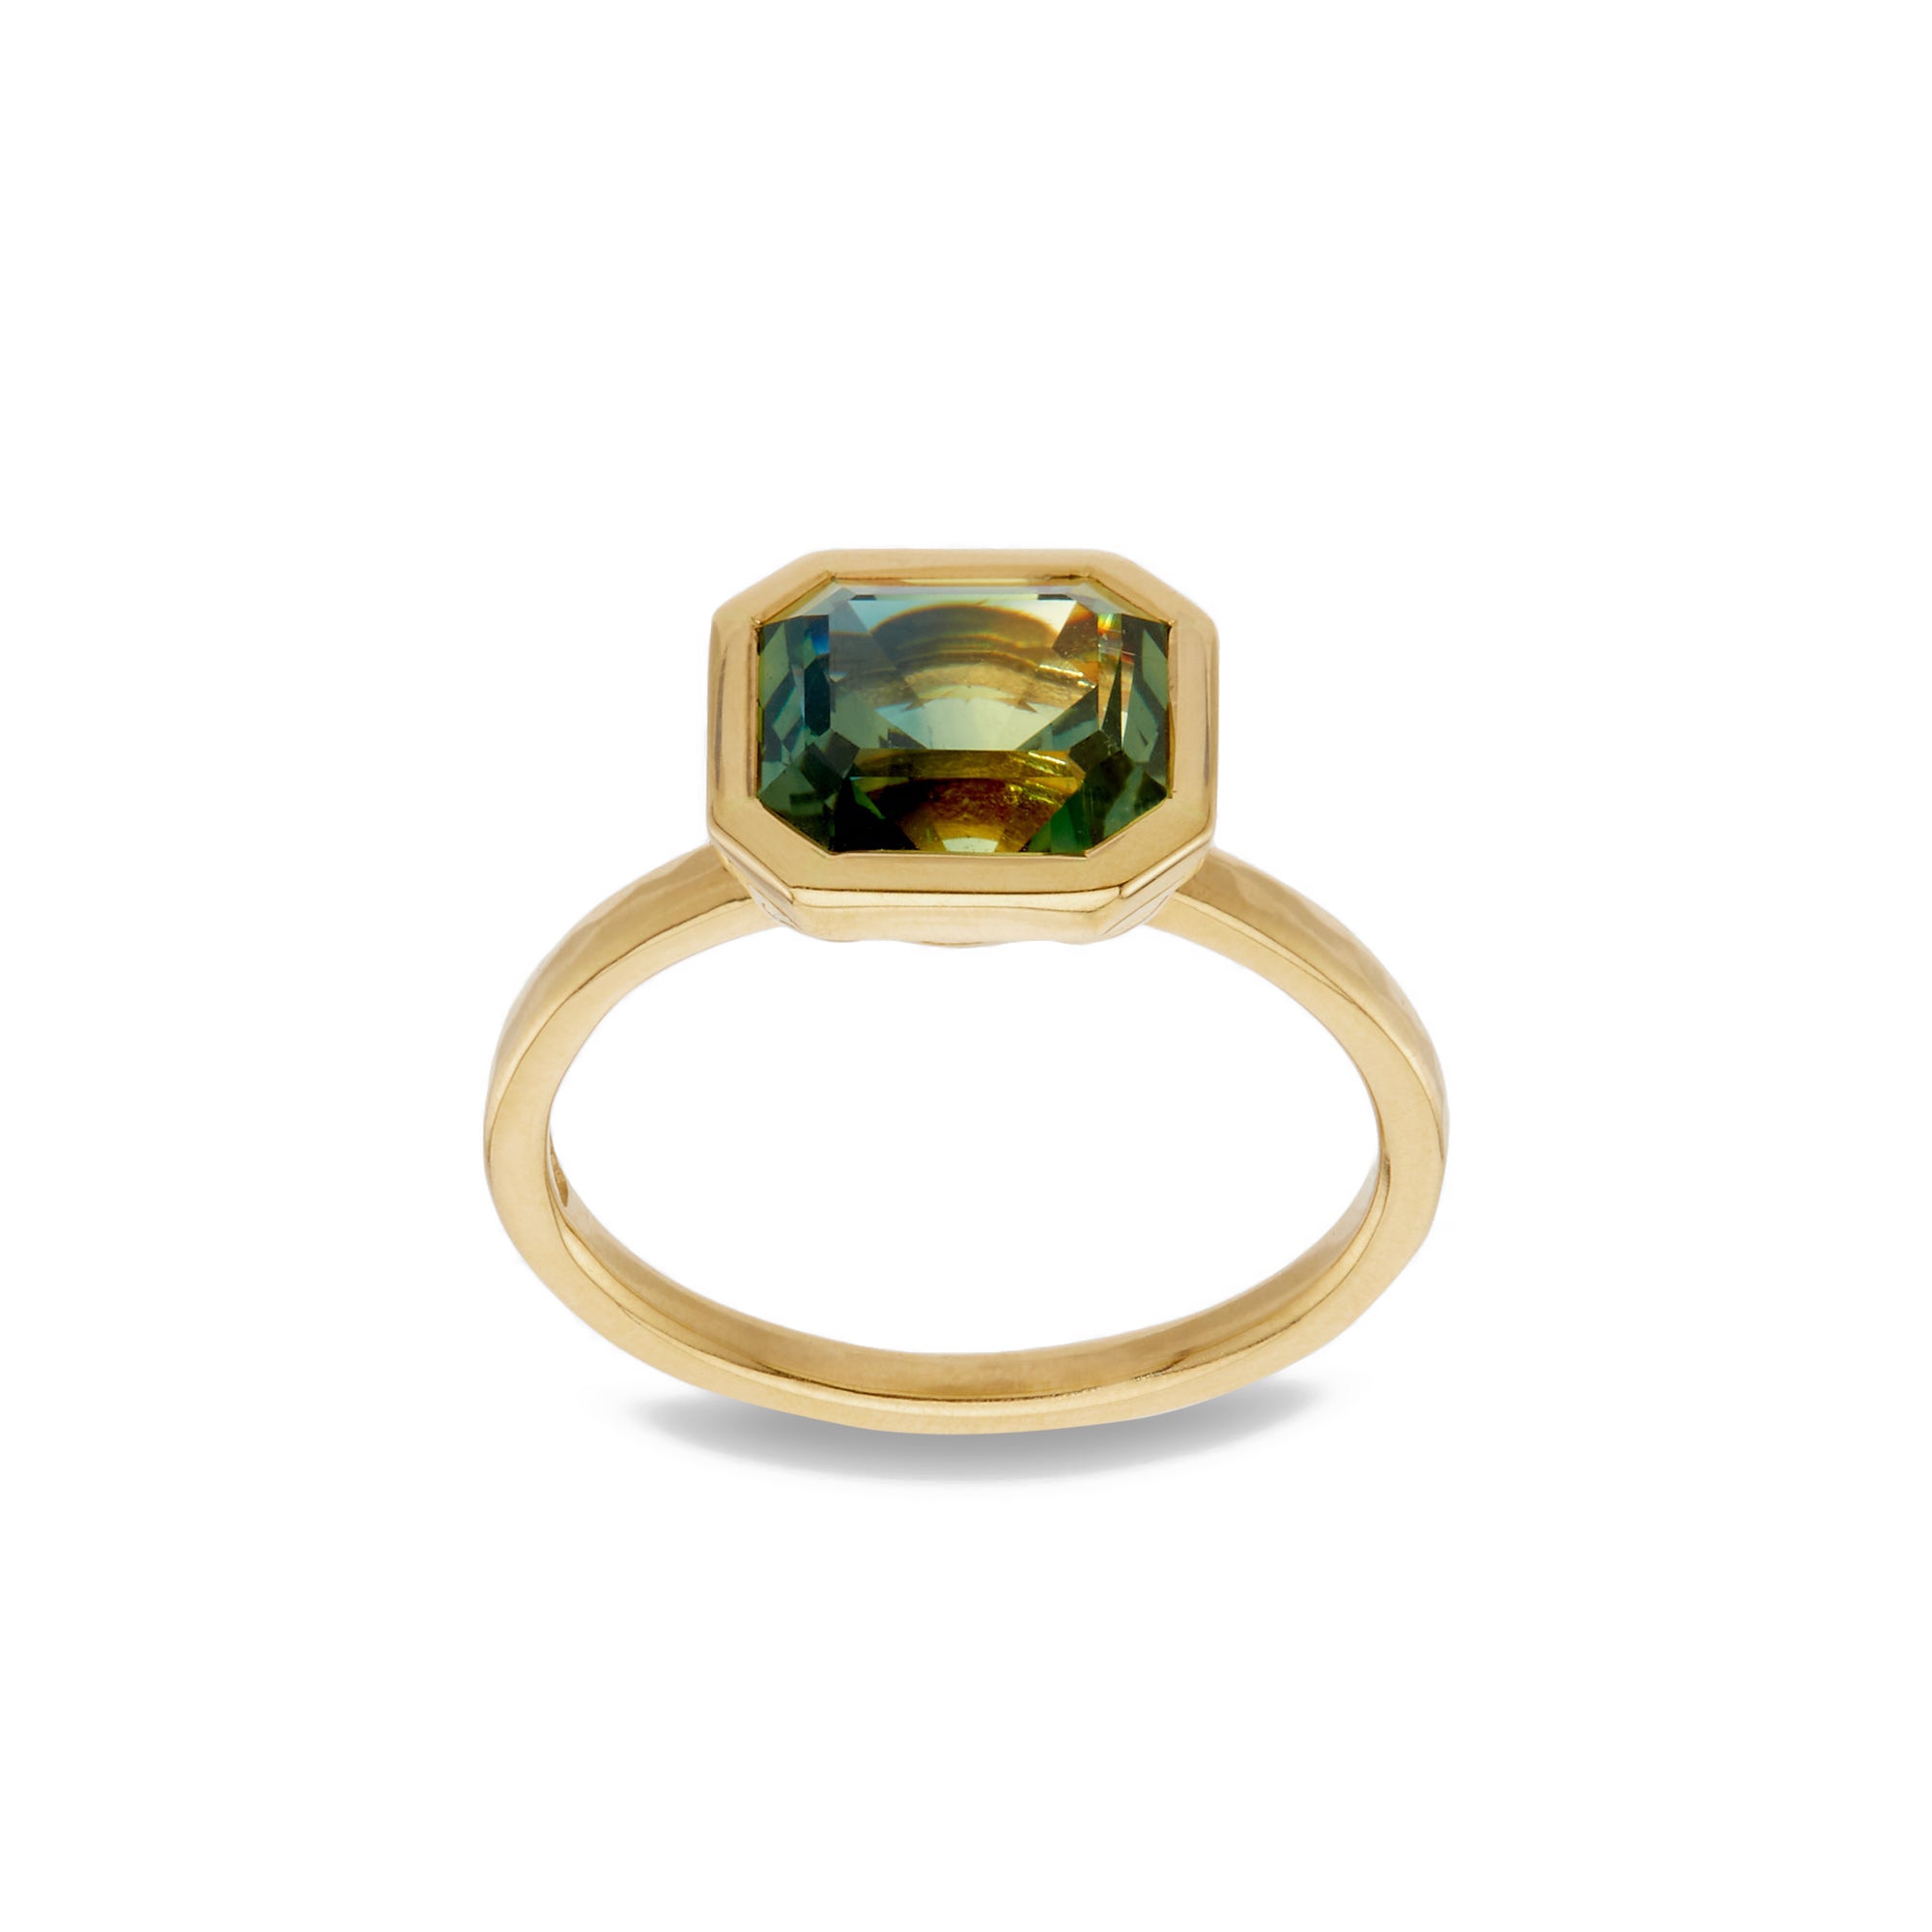 William Welstead - Unheated Green Sapphire Ring view 1